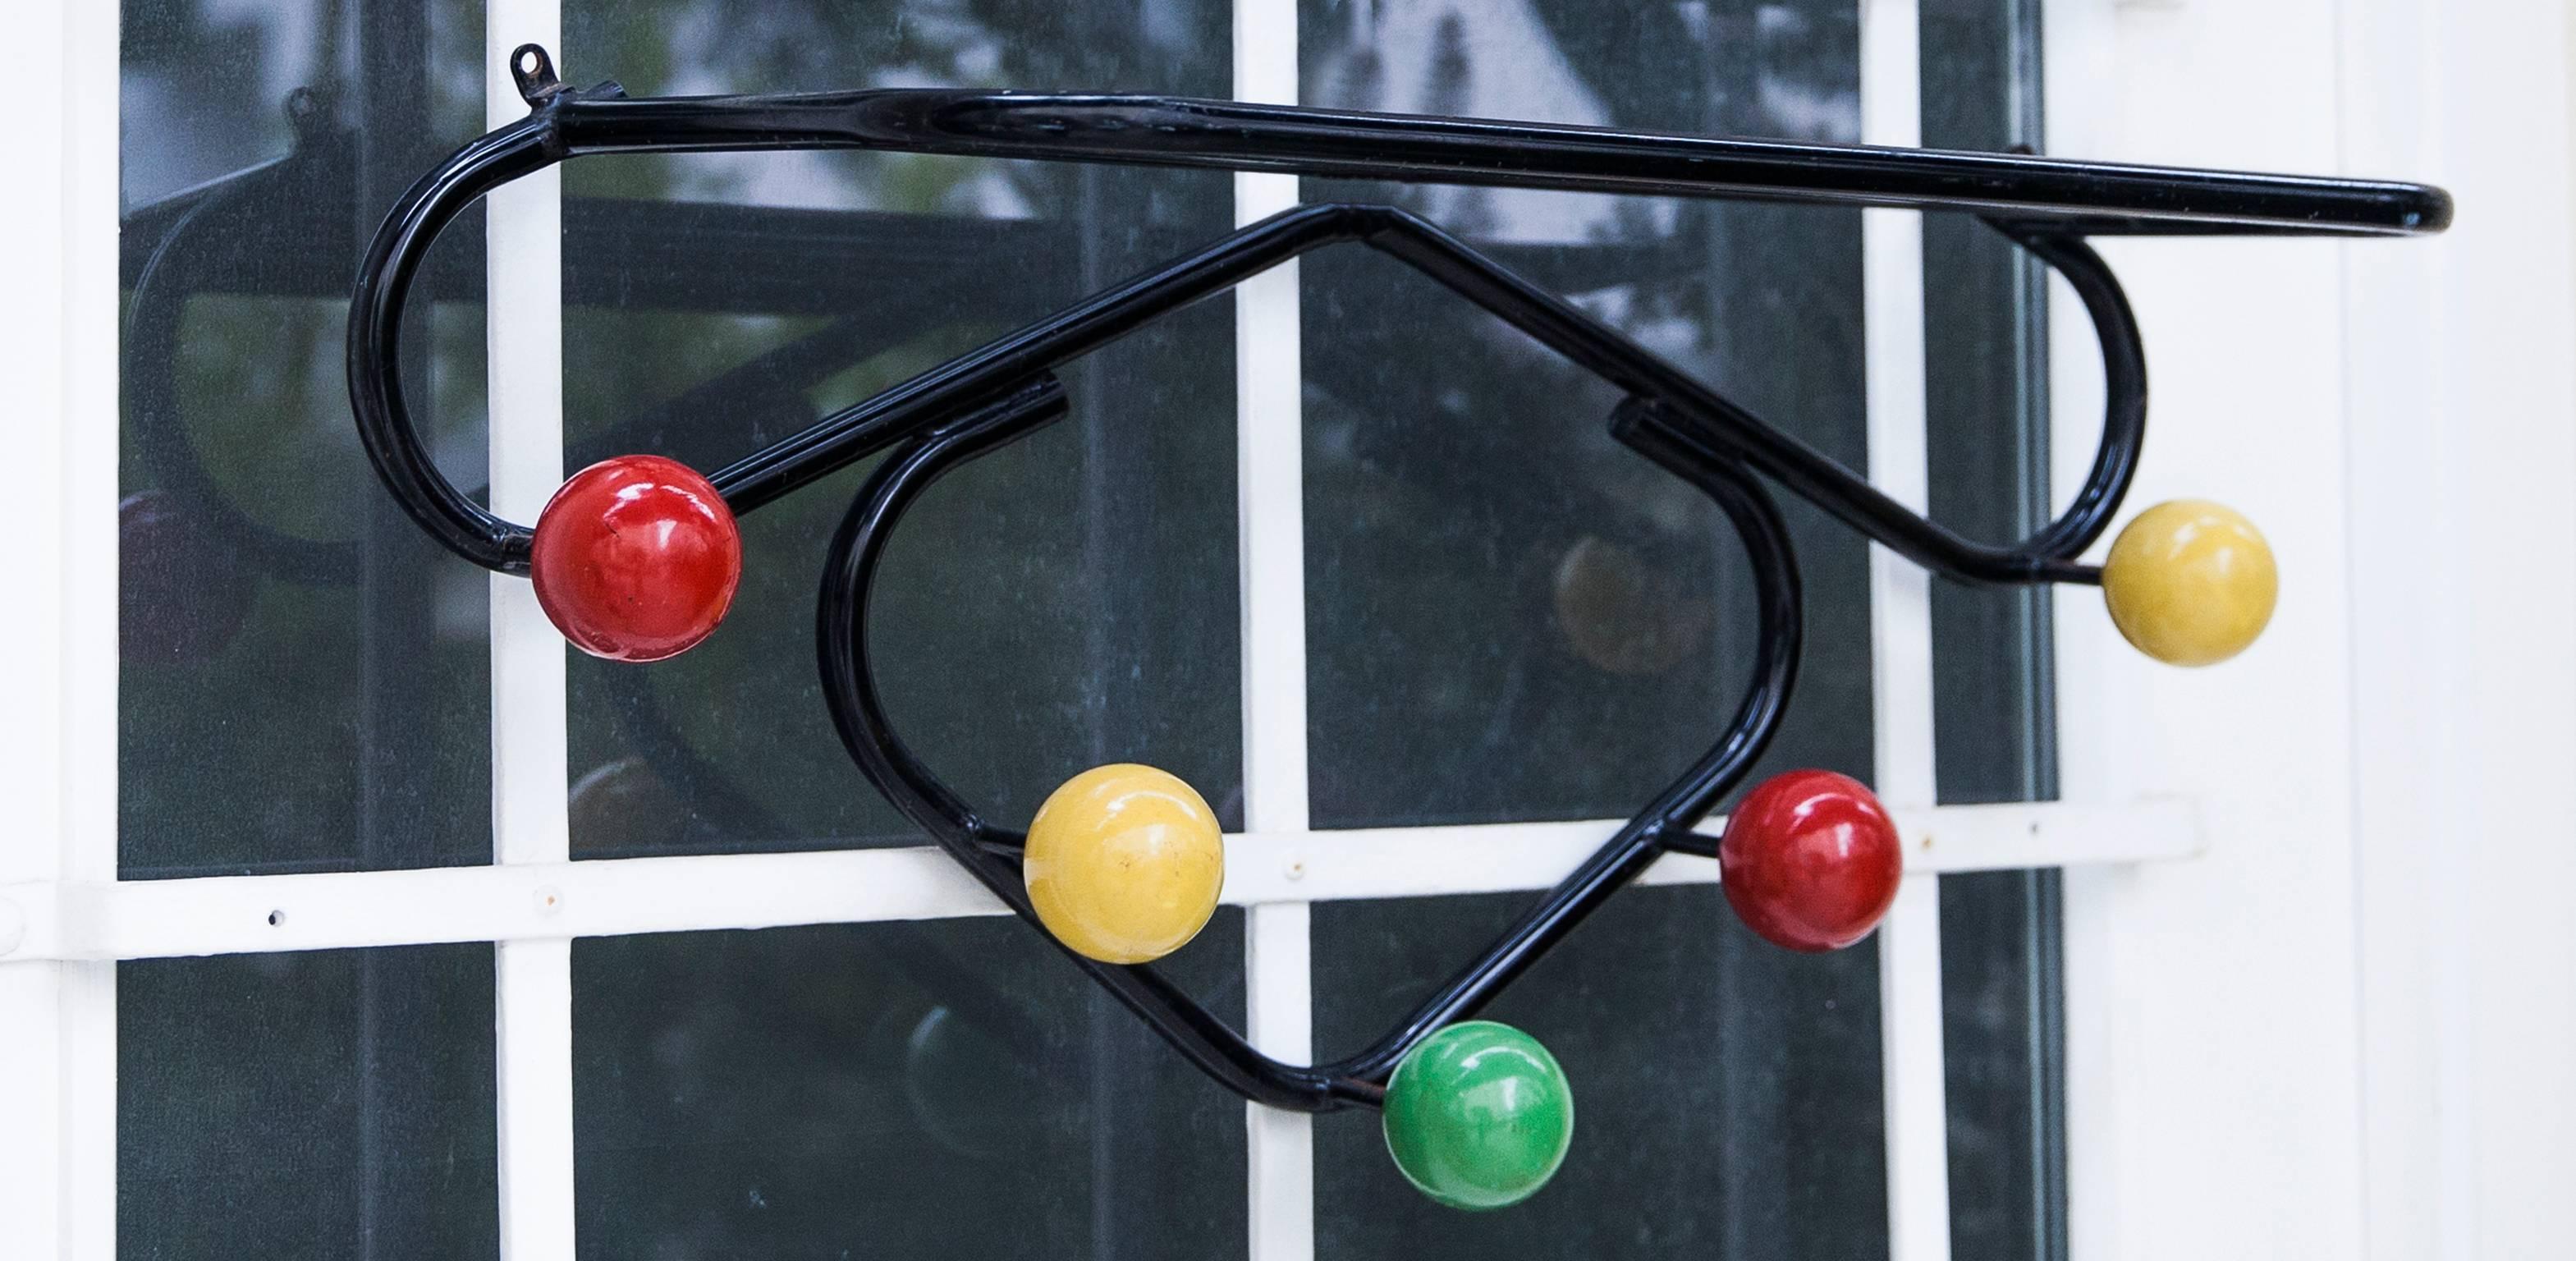 Vintage original French midcentury wall coat rack designed in the 1950s by Roger Feraud. Lacquered metal structure with five colored wooden balls. Uncommon model. Very architectural piece.